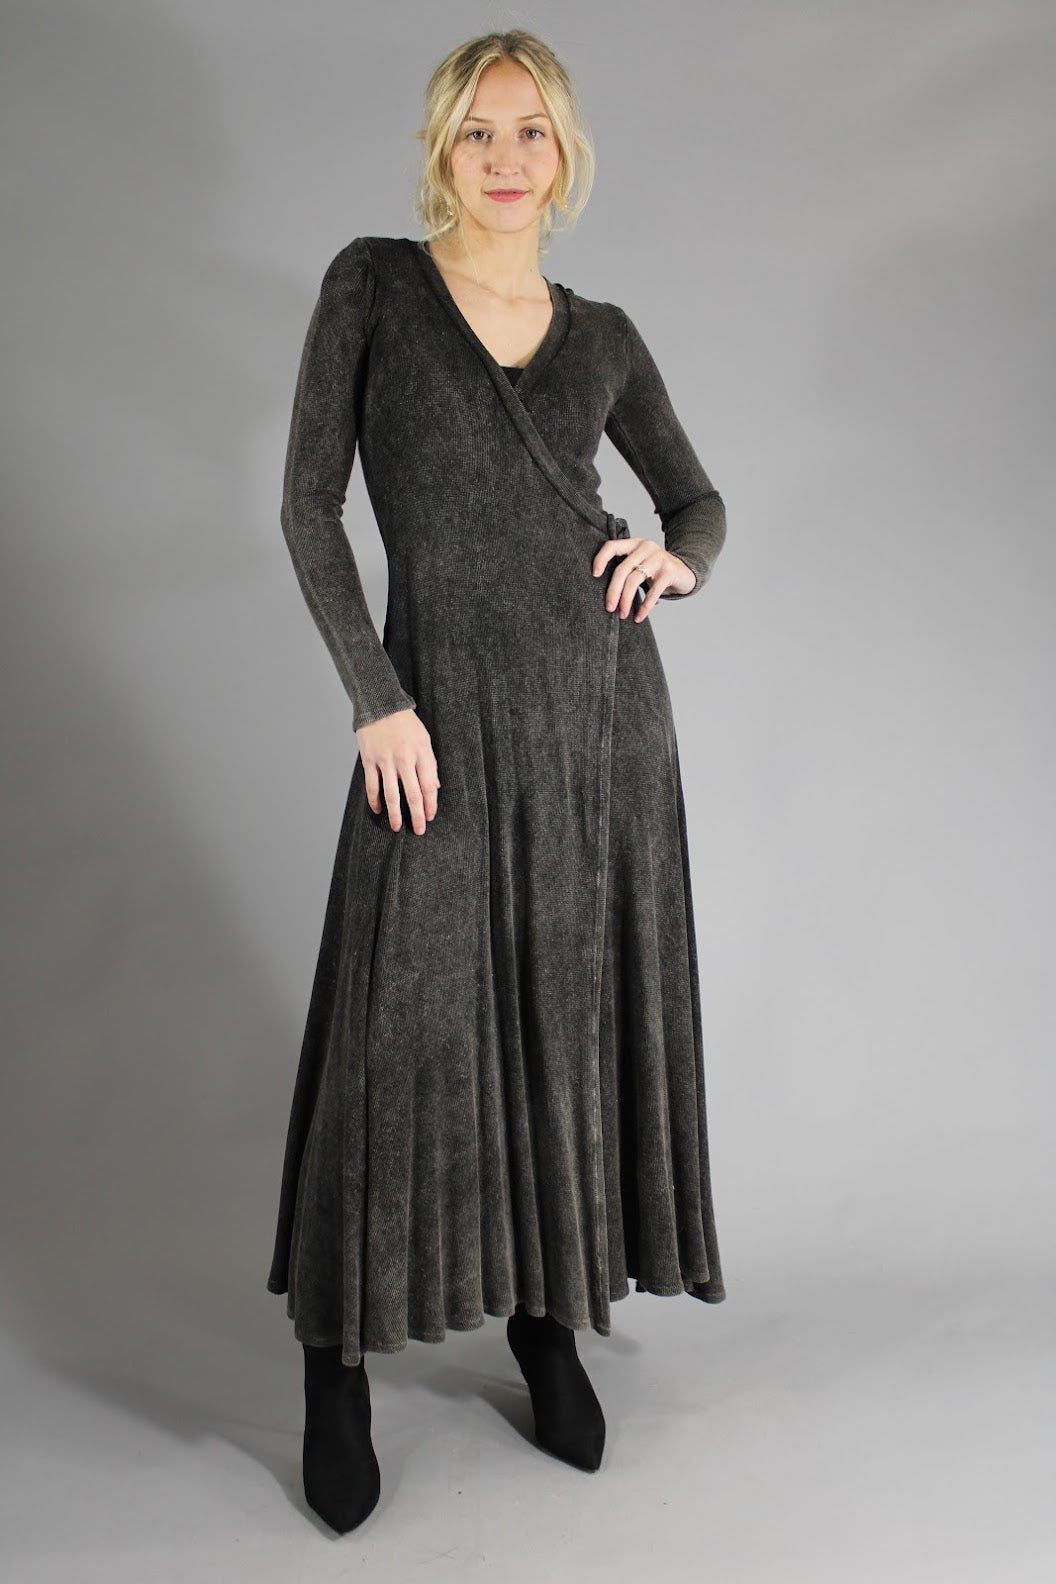 Archive Thermal Wrap Dress